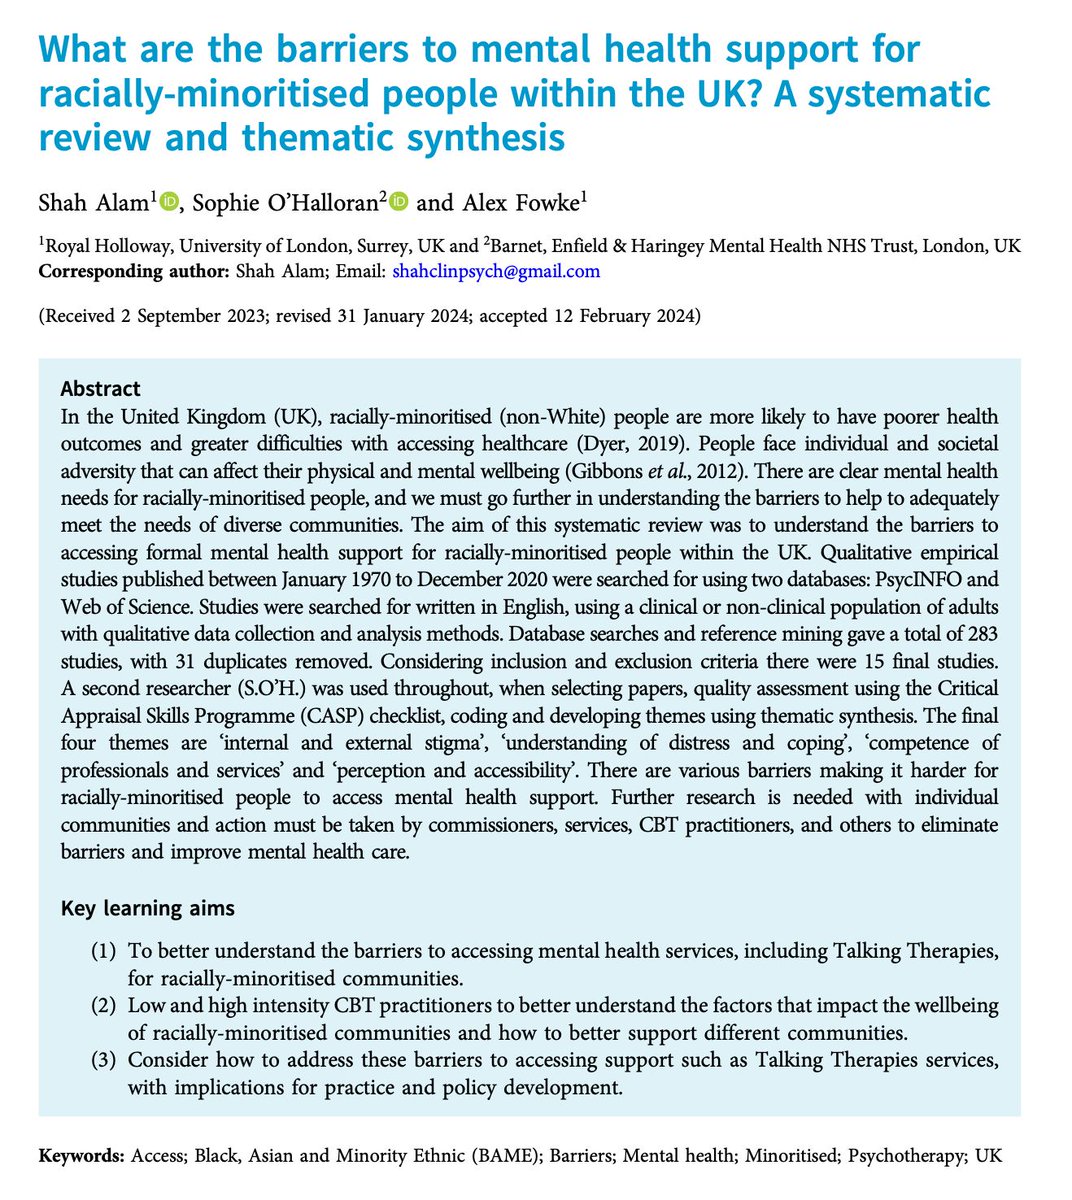 tCBT New paper: What are the barriers to mental health support for racially-minoritised people within the UK? A systematic review and thematic synthesis Full free text at buff.ly/4crbqWY